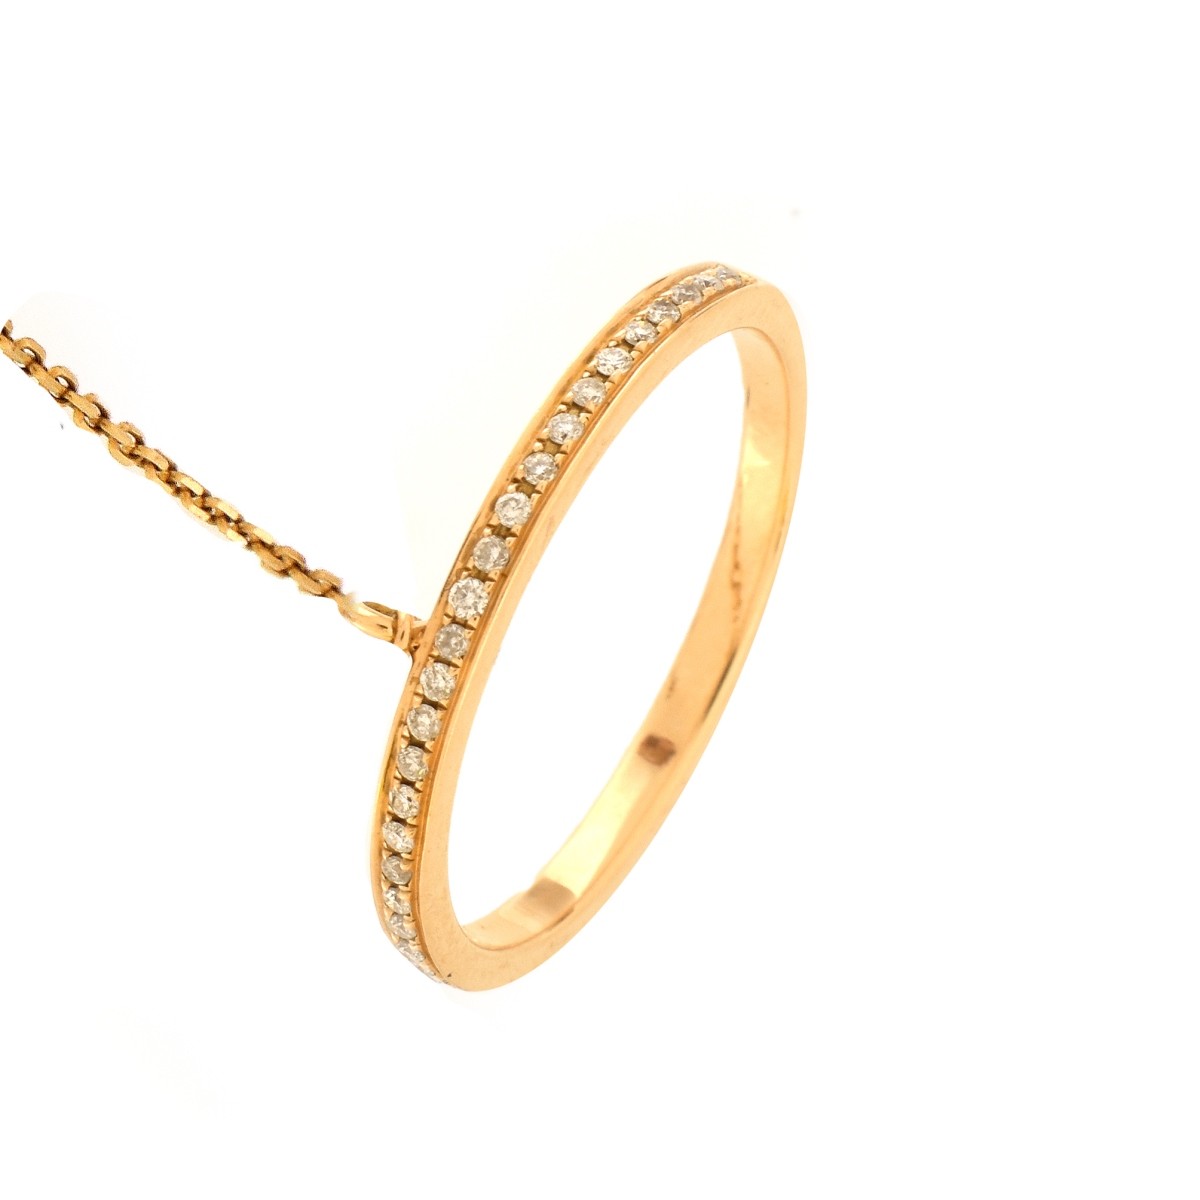 Cartier style Diamond and 18K Cuff / Ring